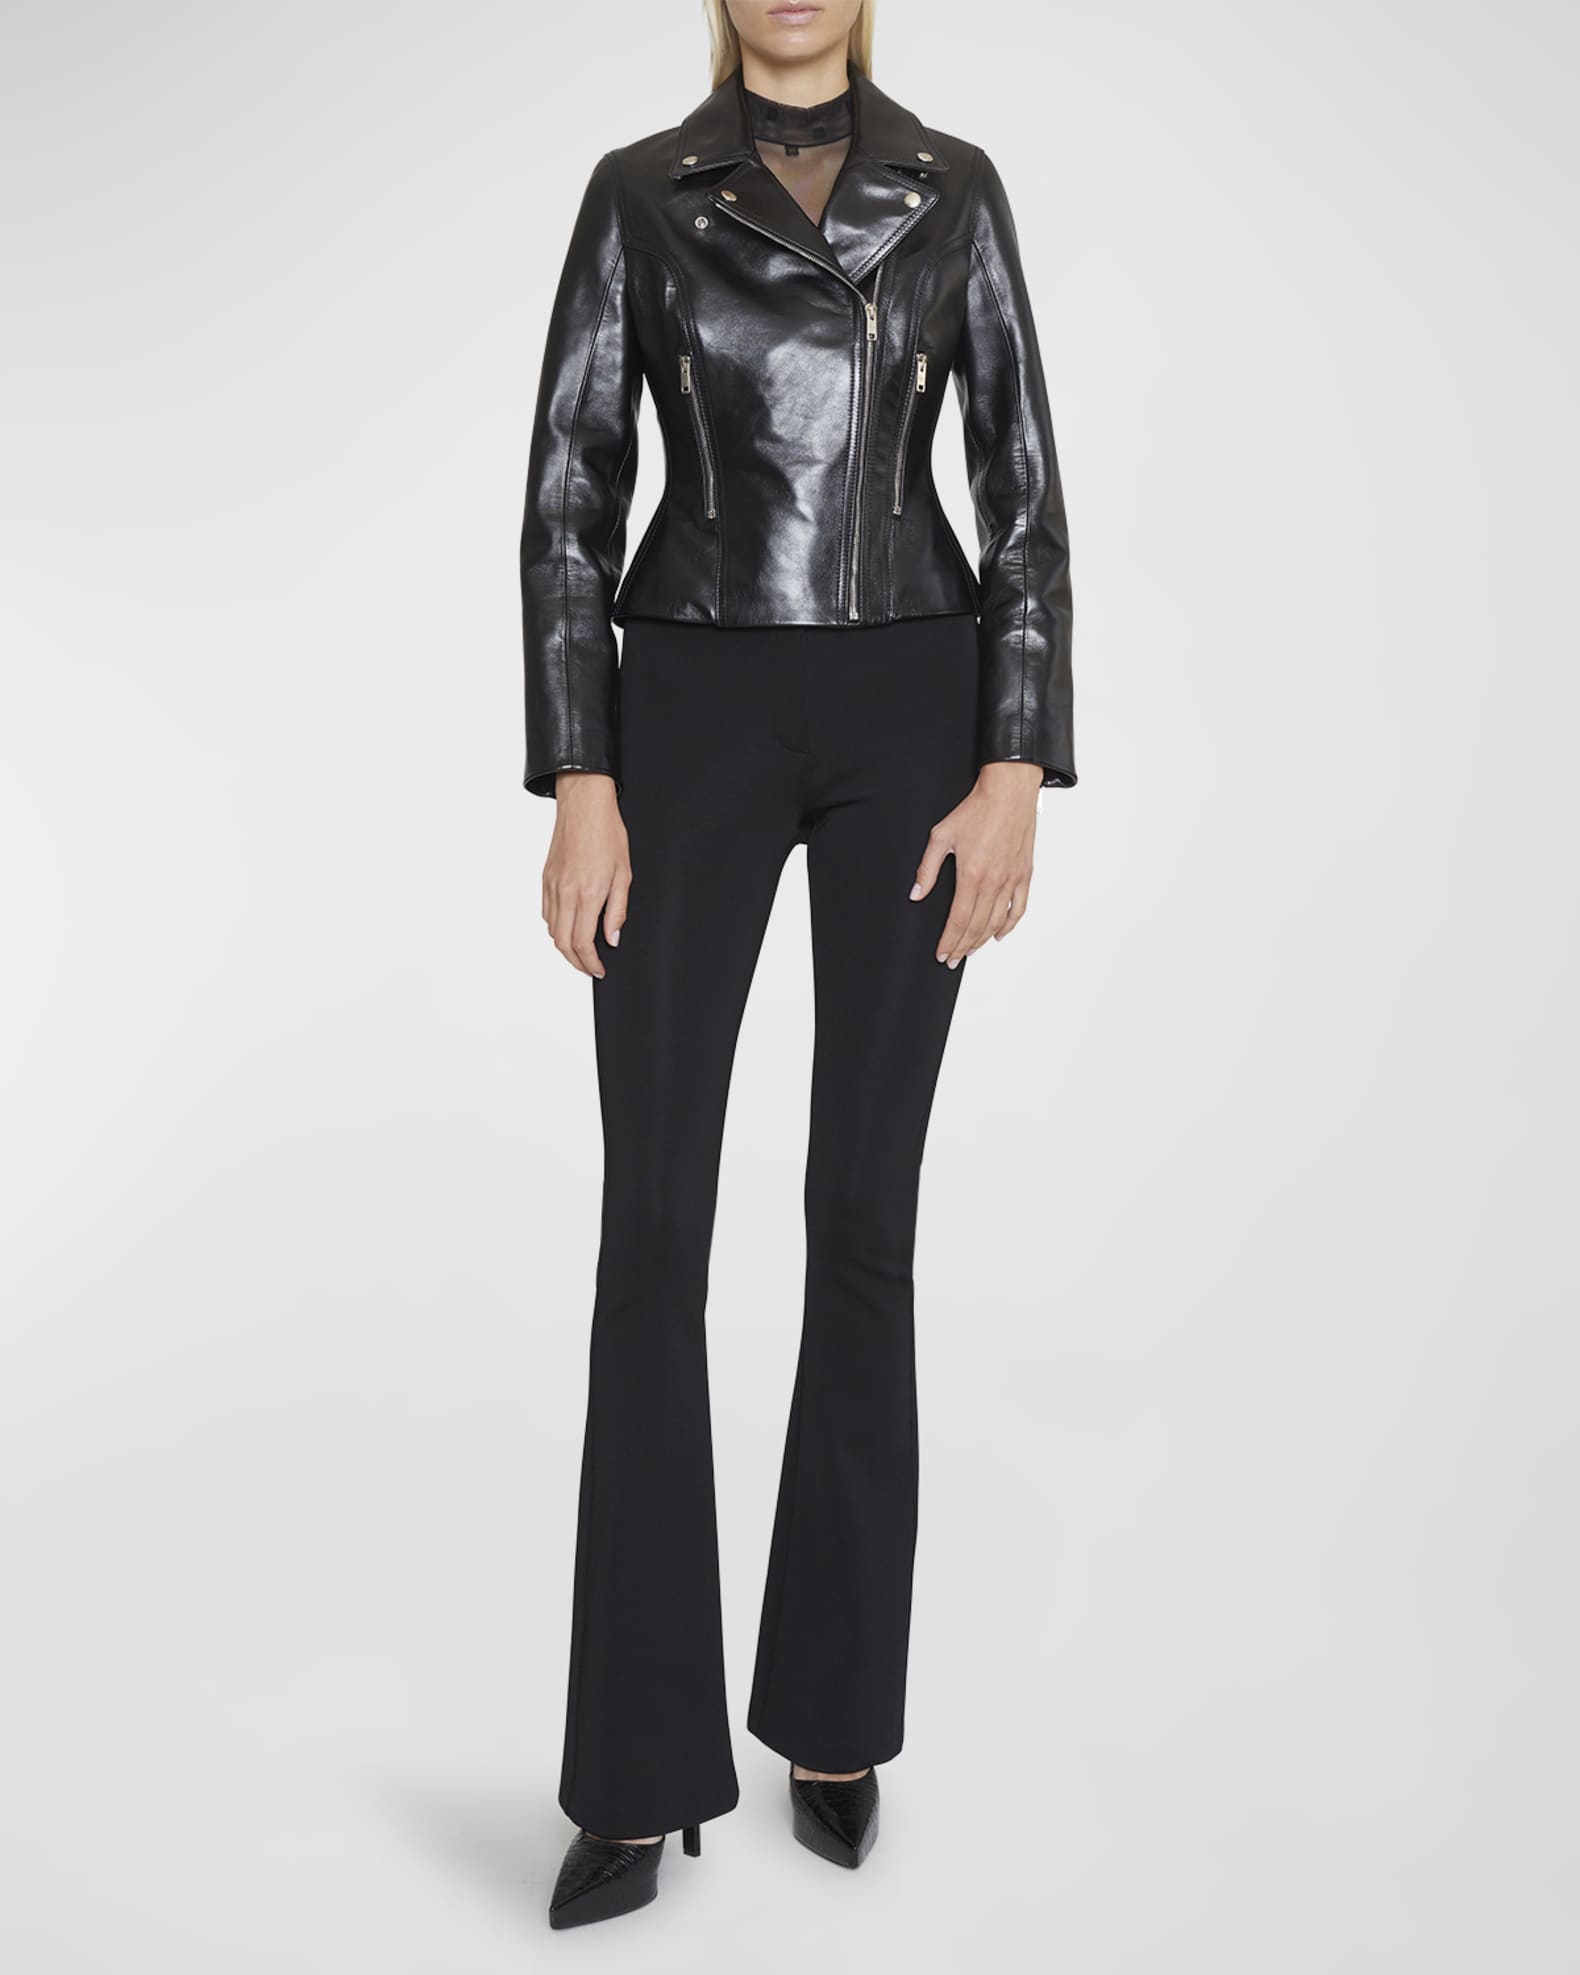 Givenchy Cinched Leather Motorcycle Jacket | Neiman Marcus